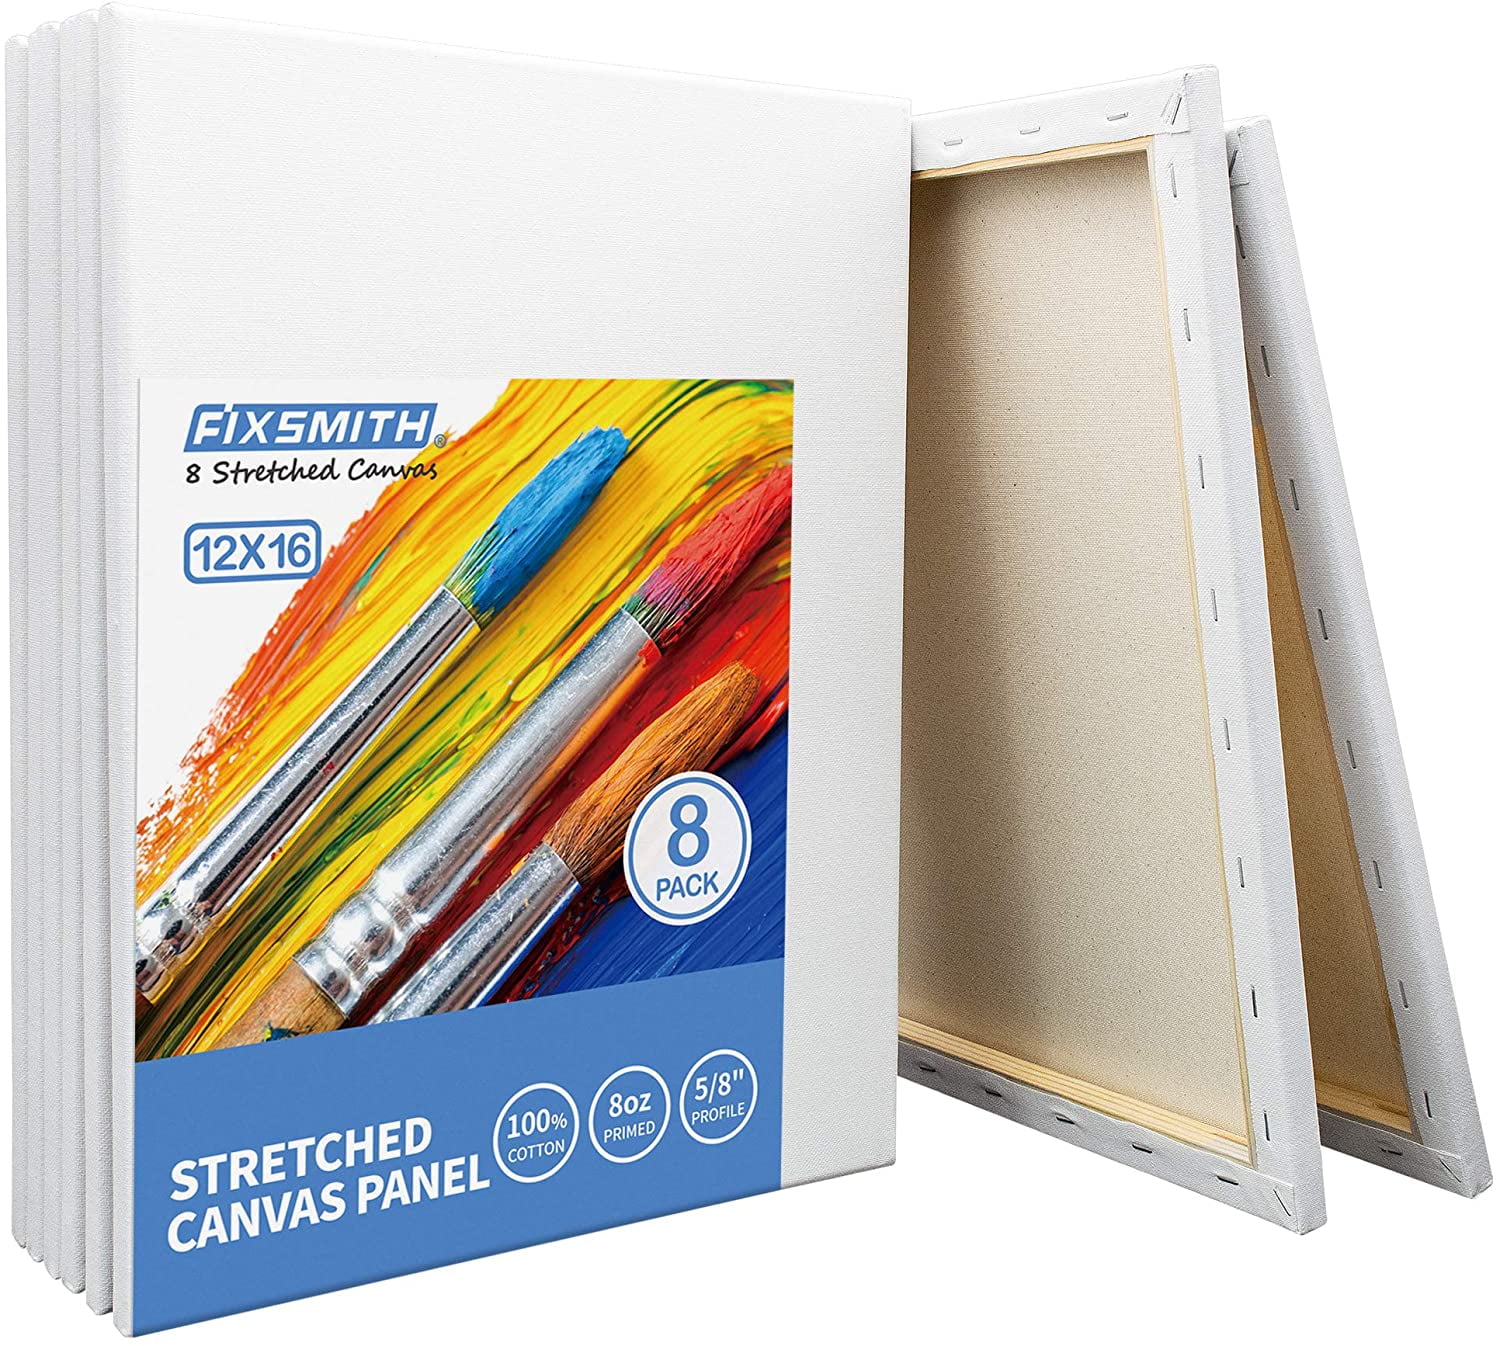 FIXSMITH Canvases for Painting, 8x10 inch Canvas Boards, Super Value 30 Pack White Blank Canvas Panels, 100% Cotton Primed,Painting Art Supplies for